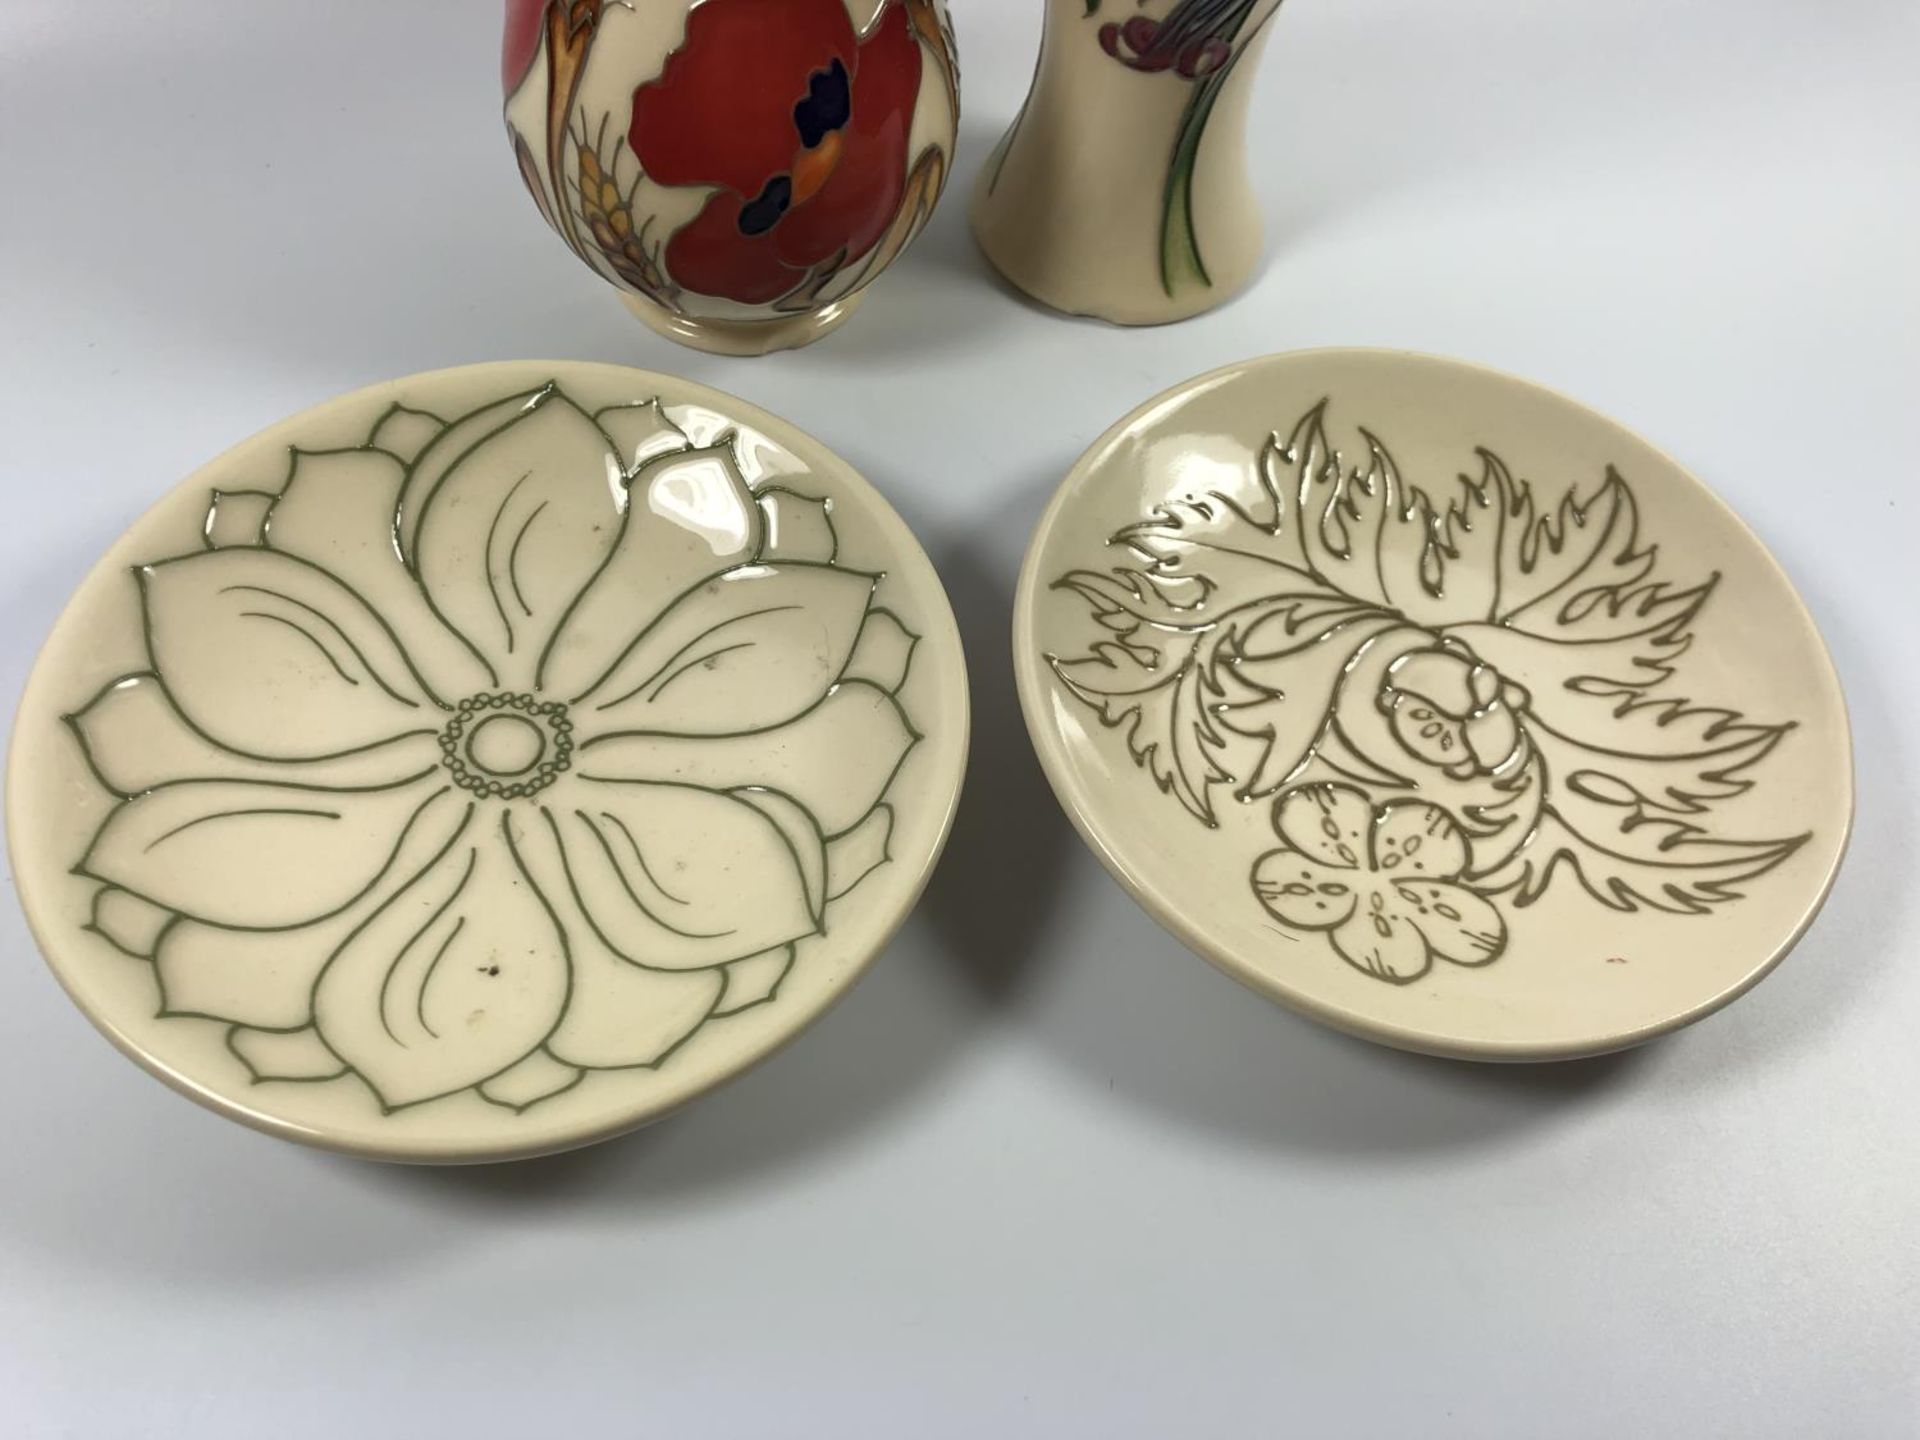 FOUR MOORCROFT POTTERY PIECES - TWO TUBE MASTER PIN DISHES, ONE BLUEBELL HARMONY VASE AND A - Image 3 of 3